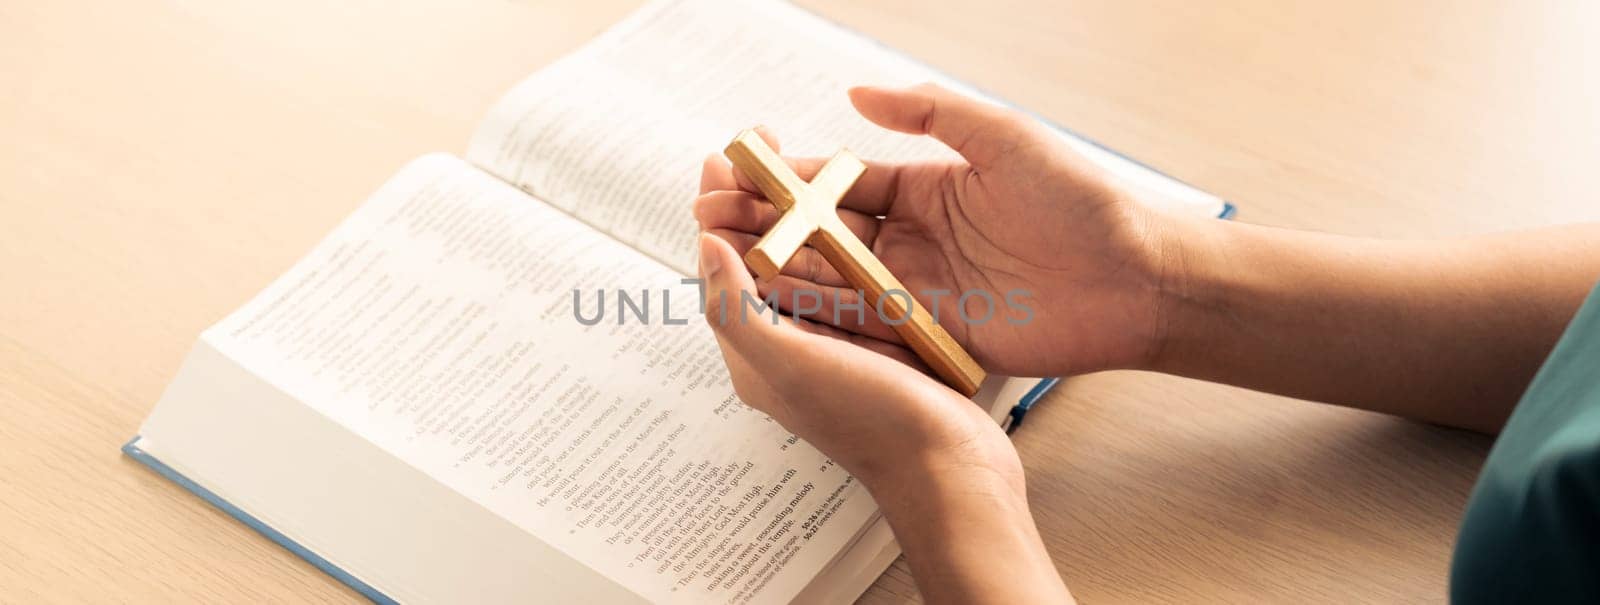 Female god believer holding wooden cross on opened holy bible book at light wooden church table. Top view. Concept of hope, religion, faith, christianity and god blessing. Warm background. Burgeoning.